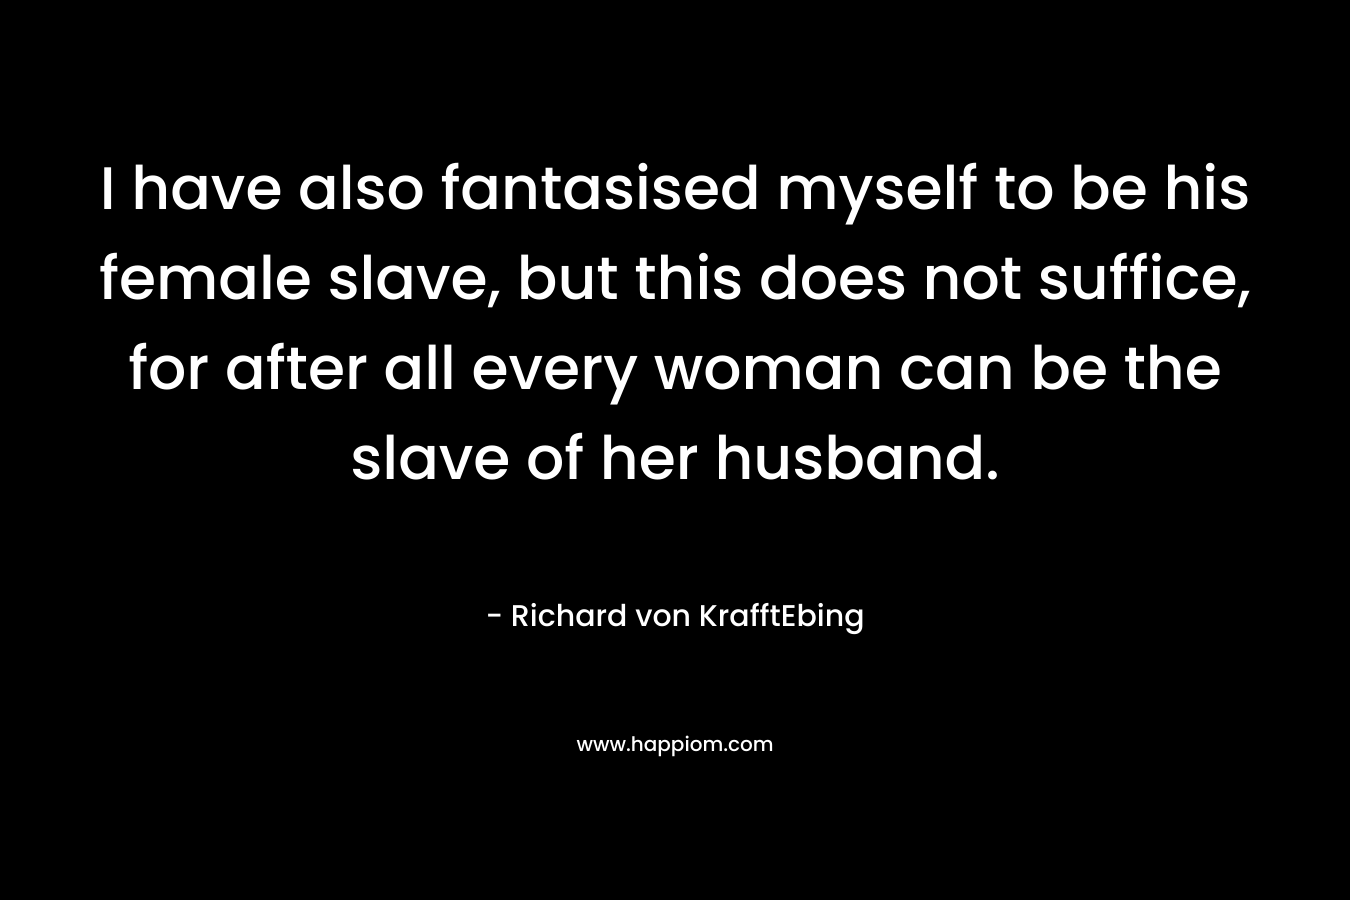 I have also fantasised myself to be his female slave, but this does not suffice, for after all every woman can be the slave of her husband.